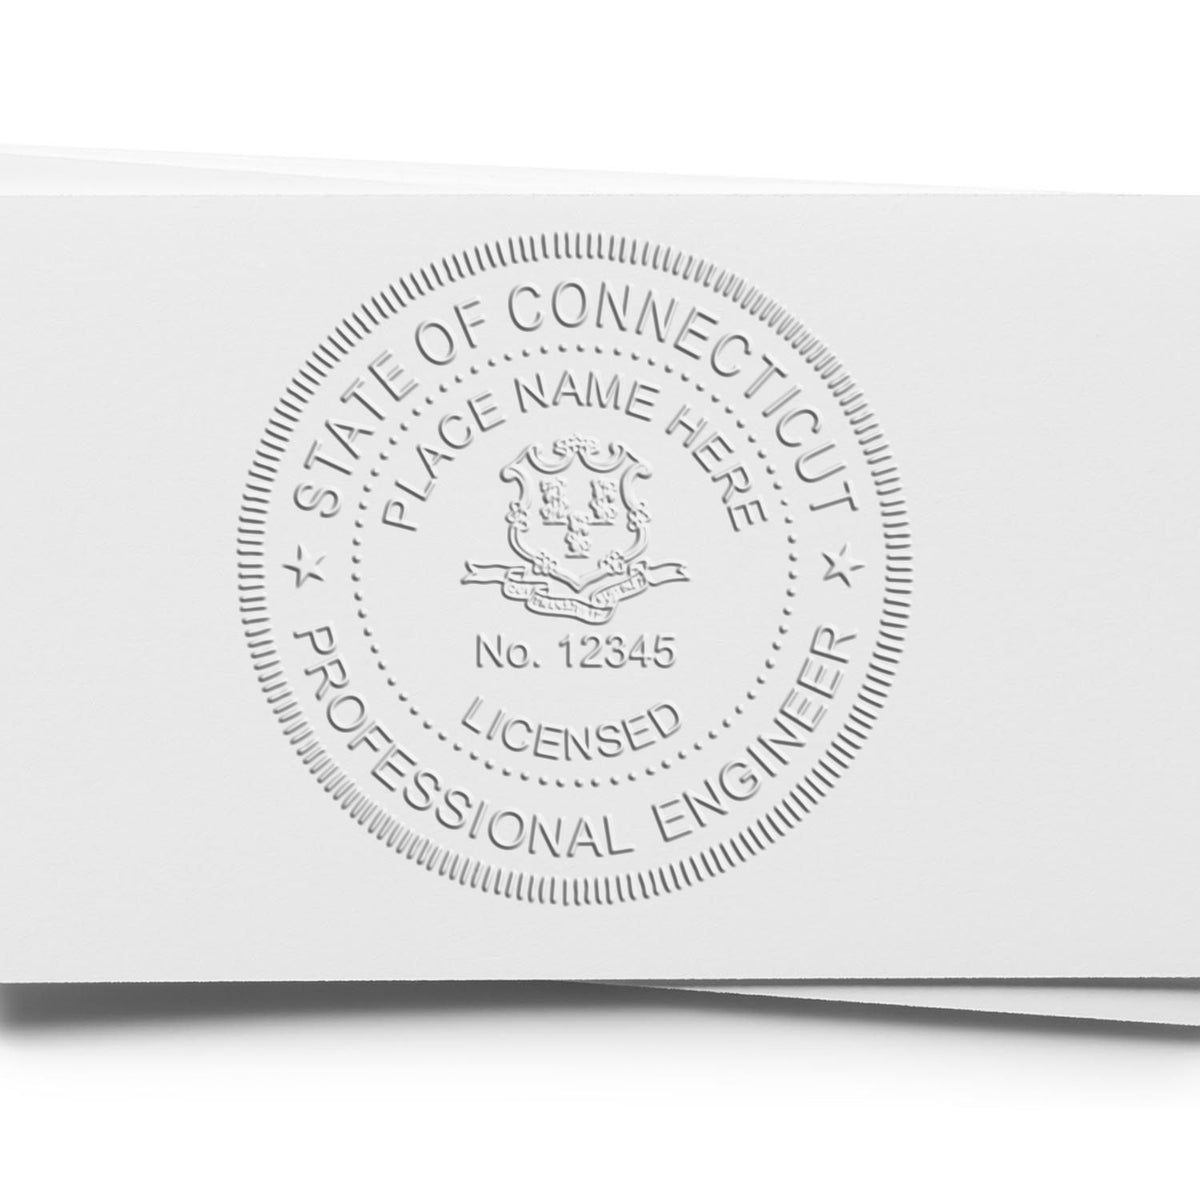 The State of Connecticut Extended Long Reach Engineer Seal stamp impression comes to life with a crisp, detailed photo on paper - showcasing true professional quality.